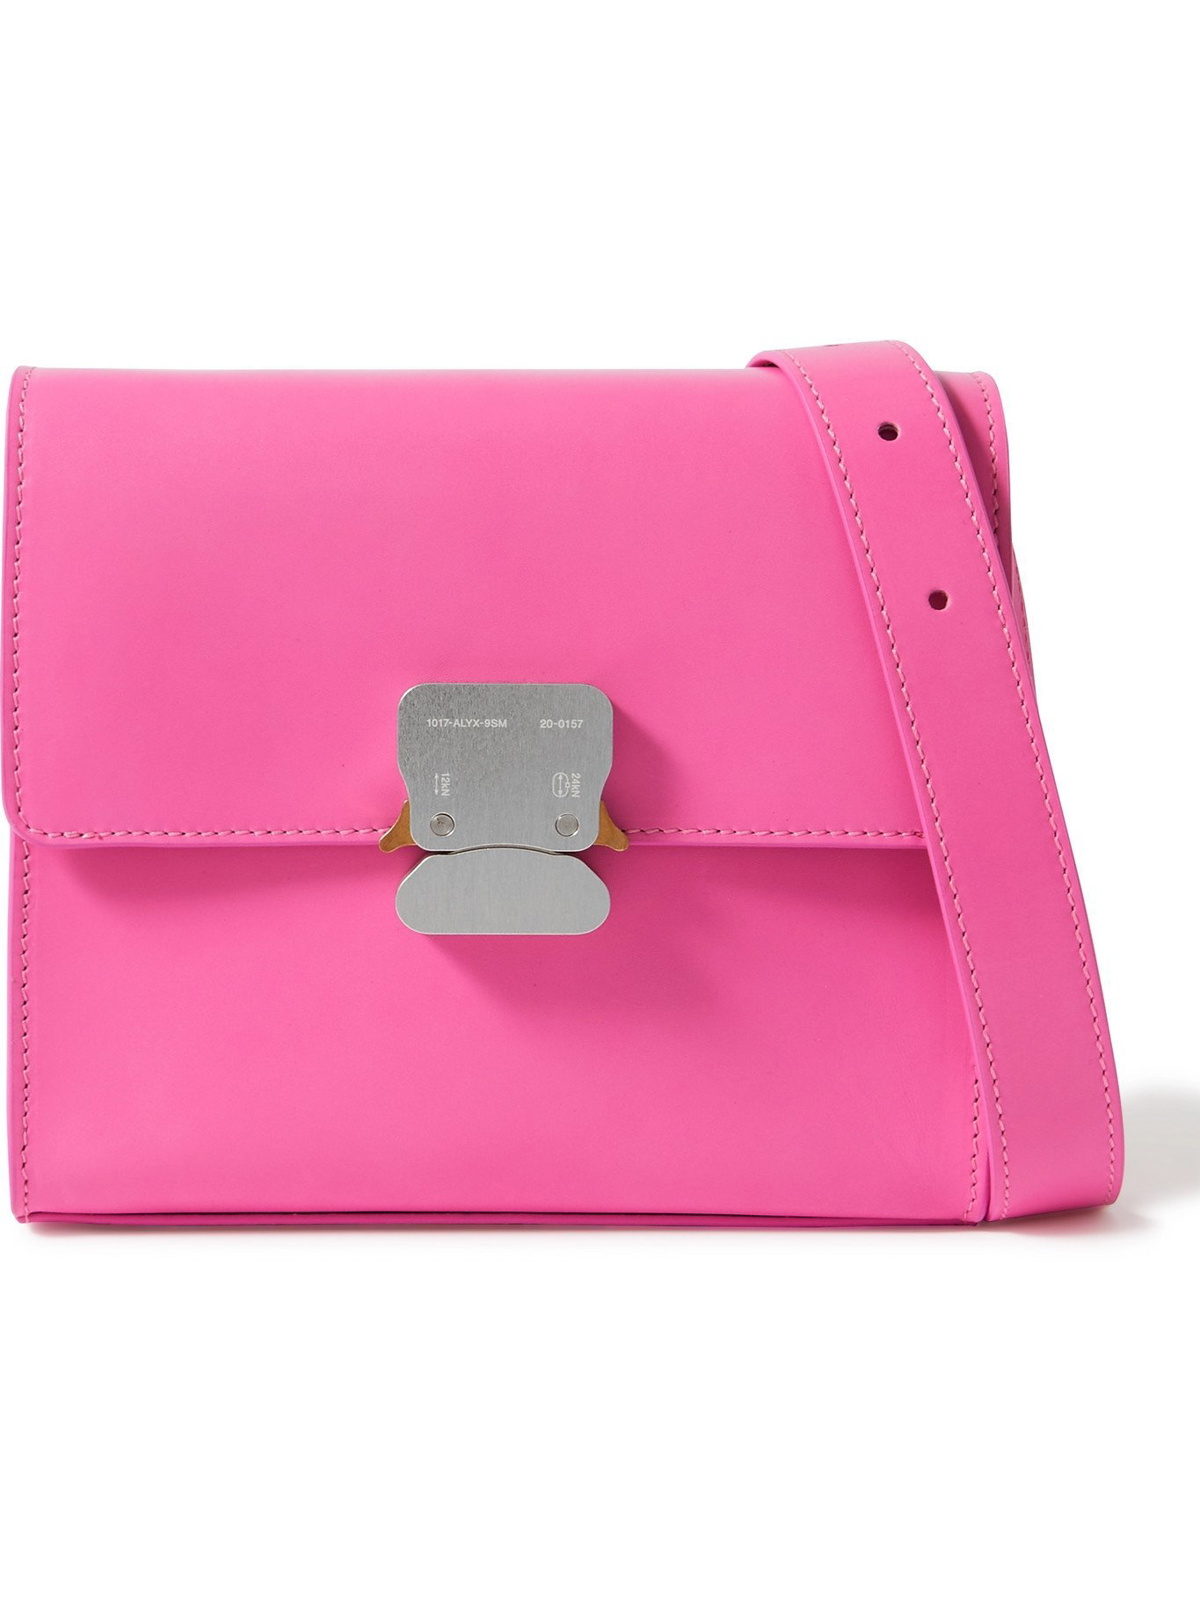 1017 ALYX 9SM - Small Leather Messenger Bag - Pink 1017 ALYX 9SM